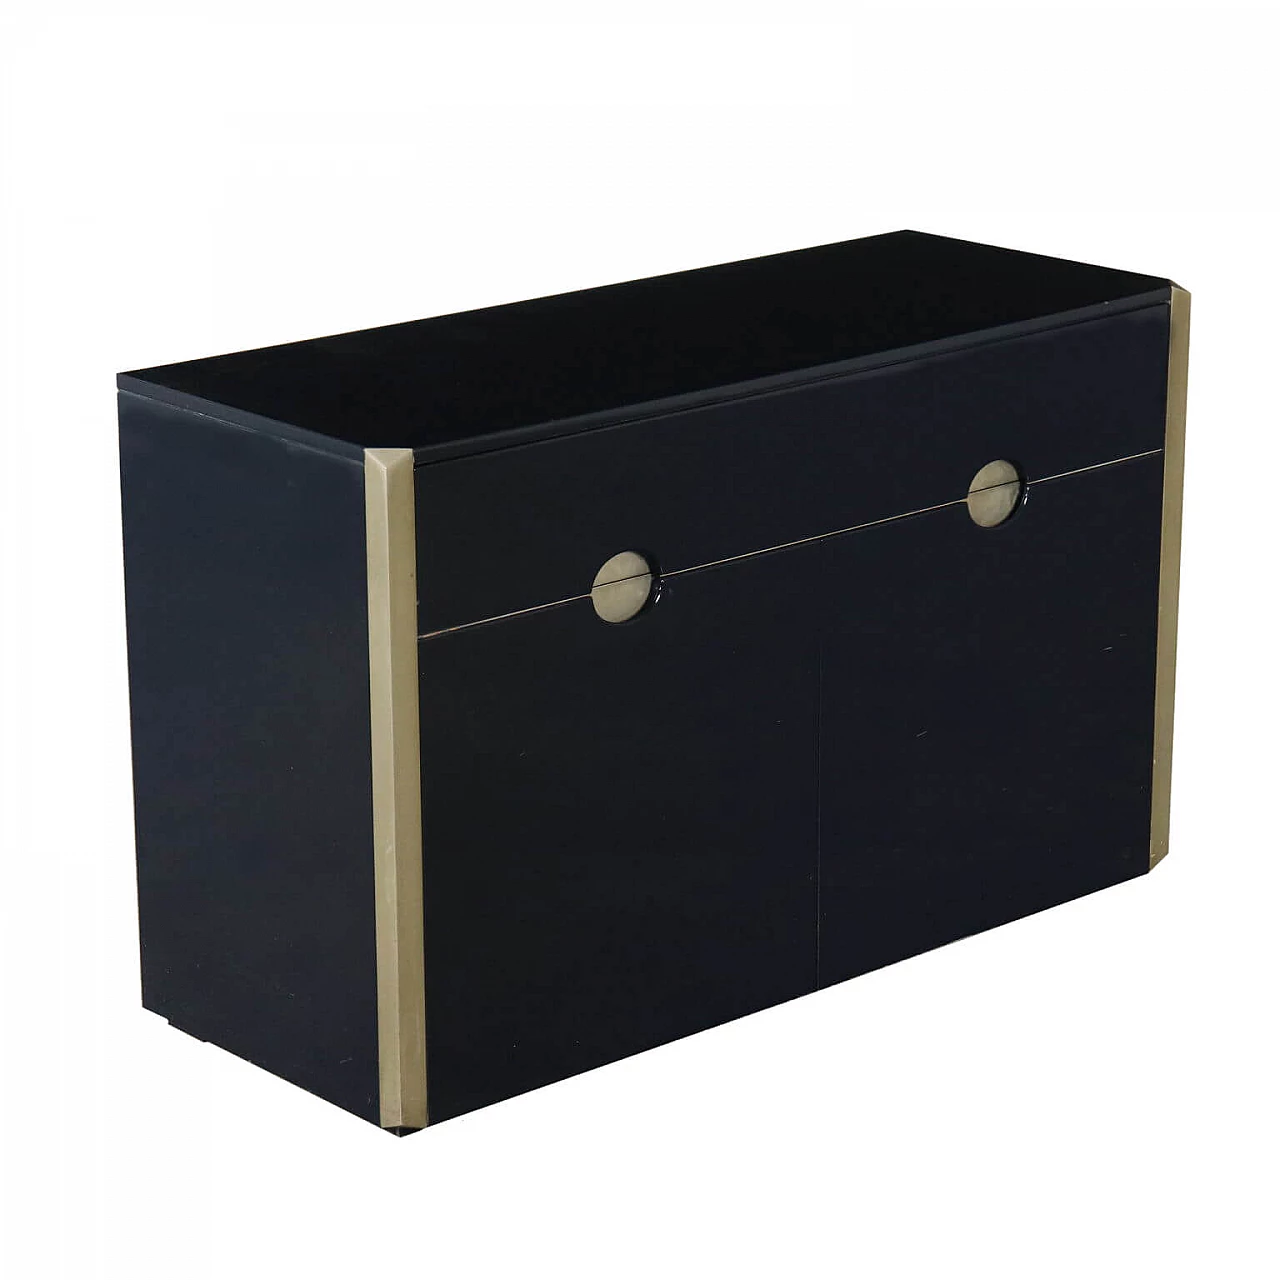 MB3 sideboard in lacquered wood and chromed metal by Luici Caccia Dominioni for Azucena, 70s 1237849